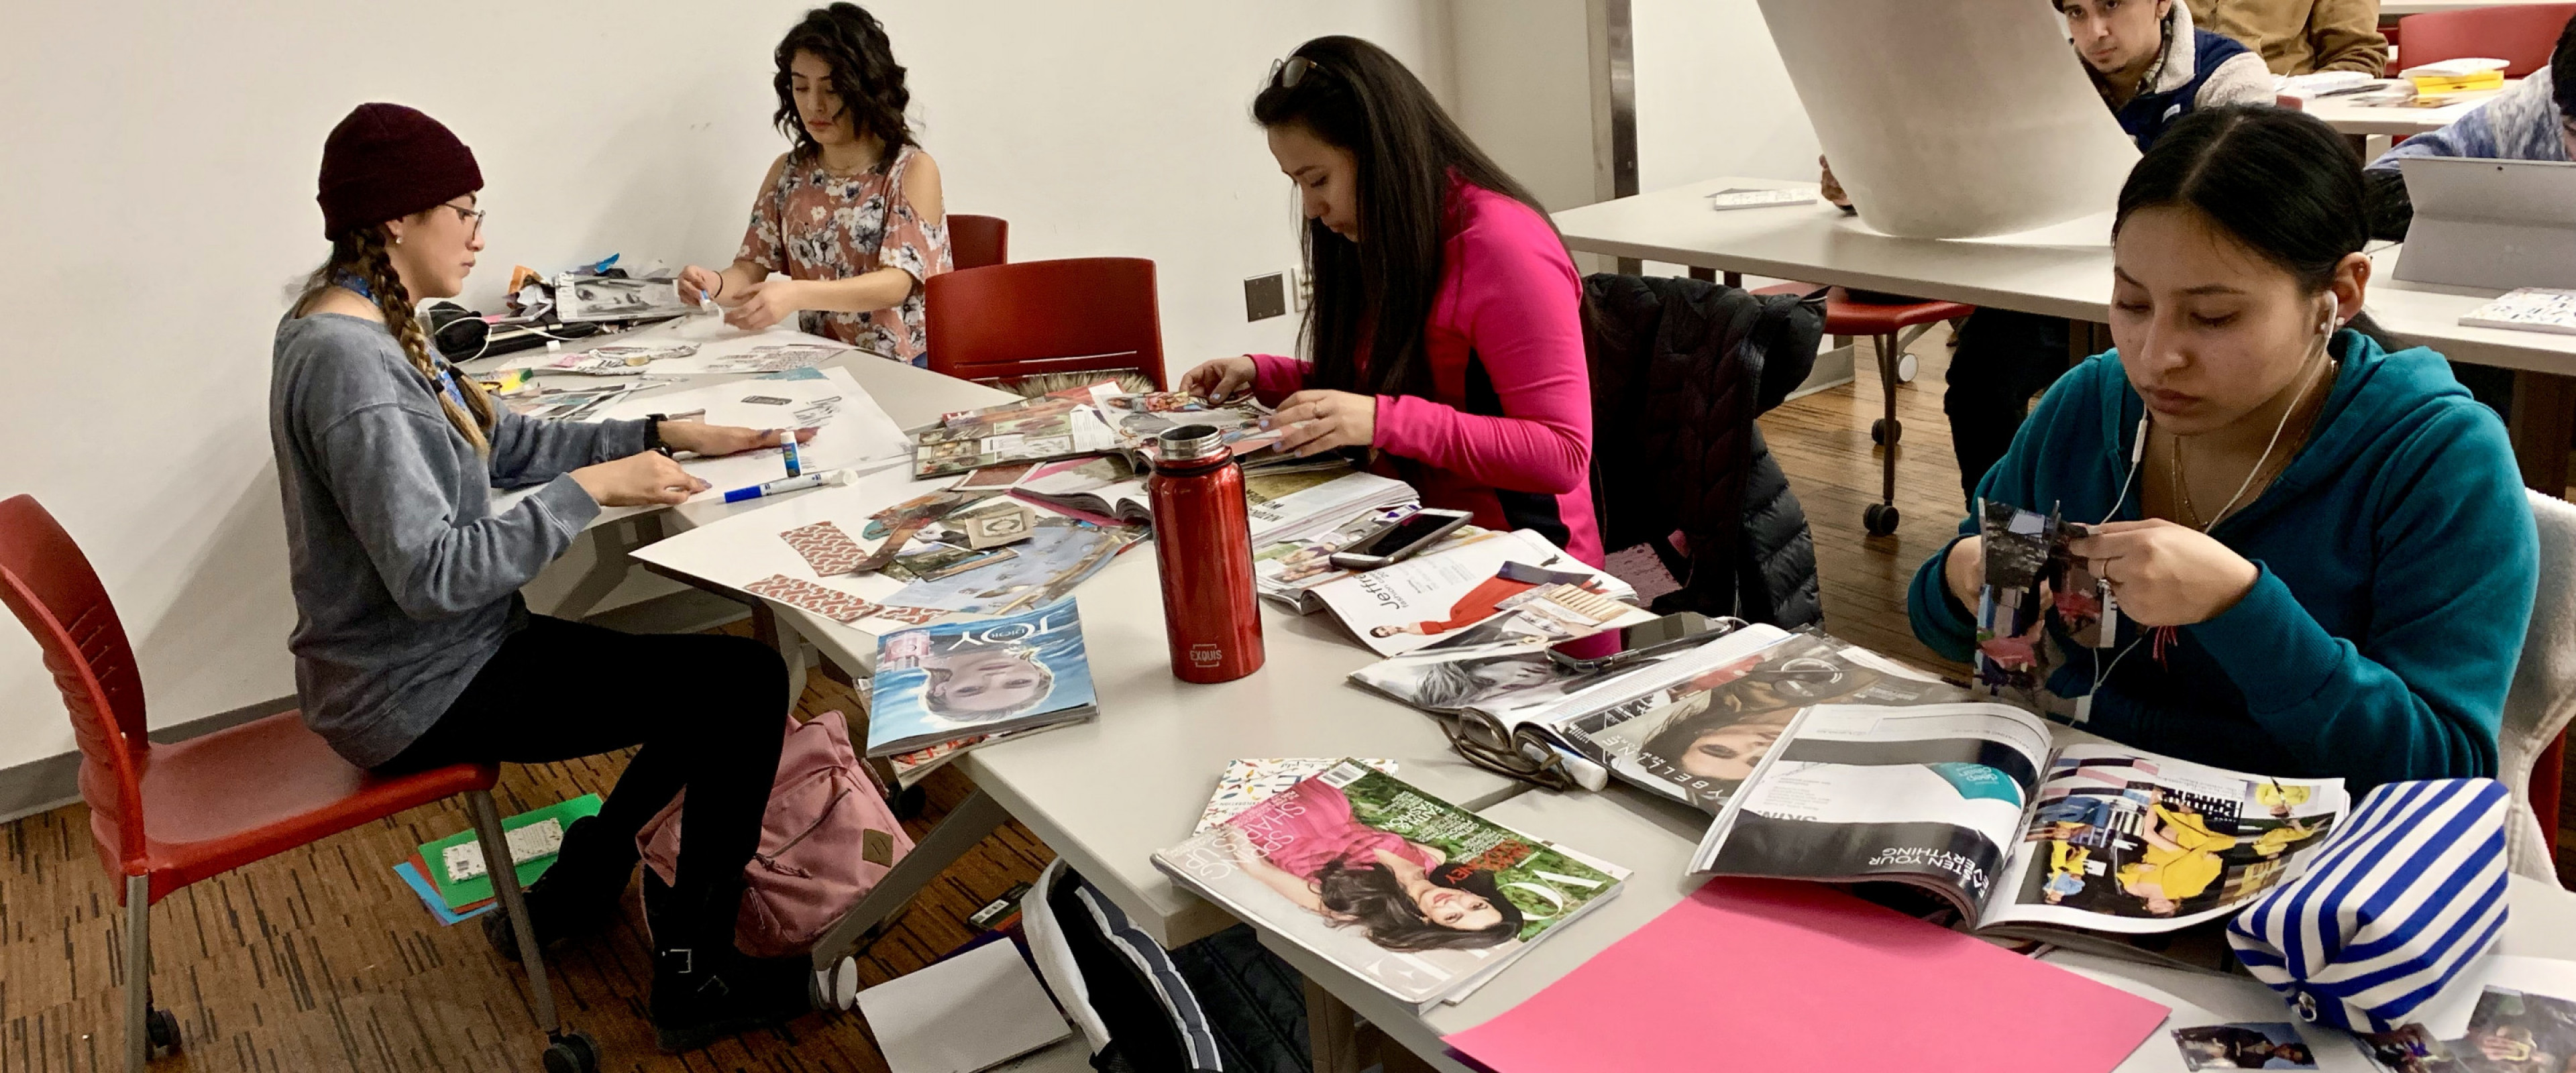 Students sitting at a long table cutting out images from magazines.